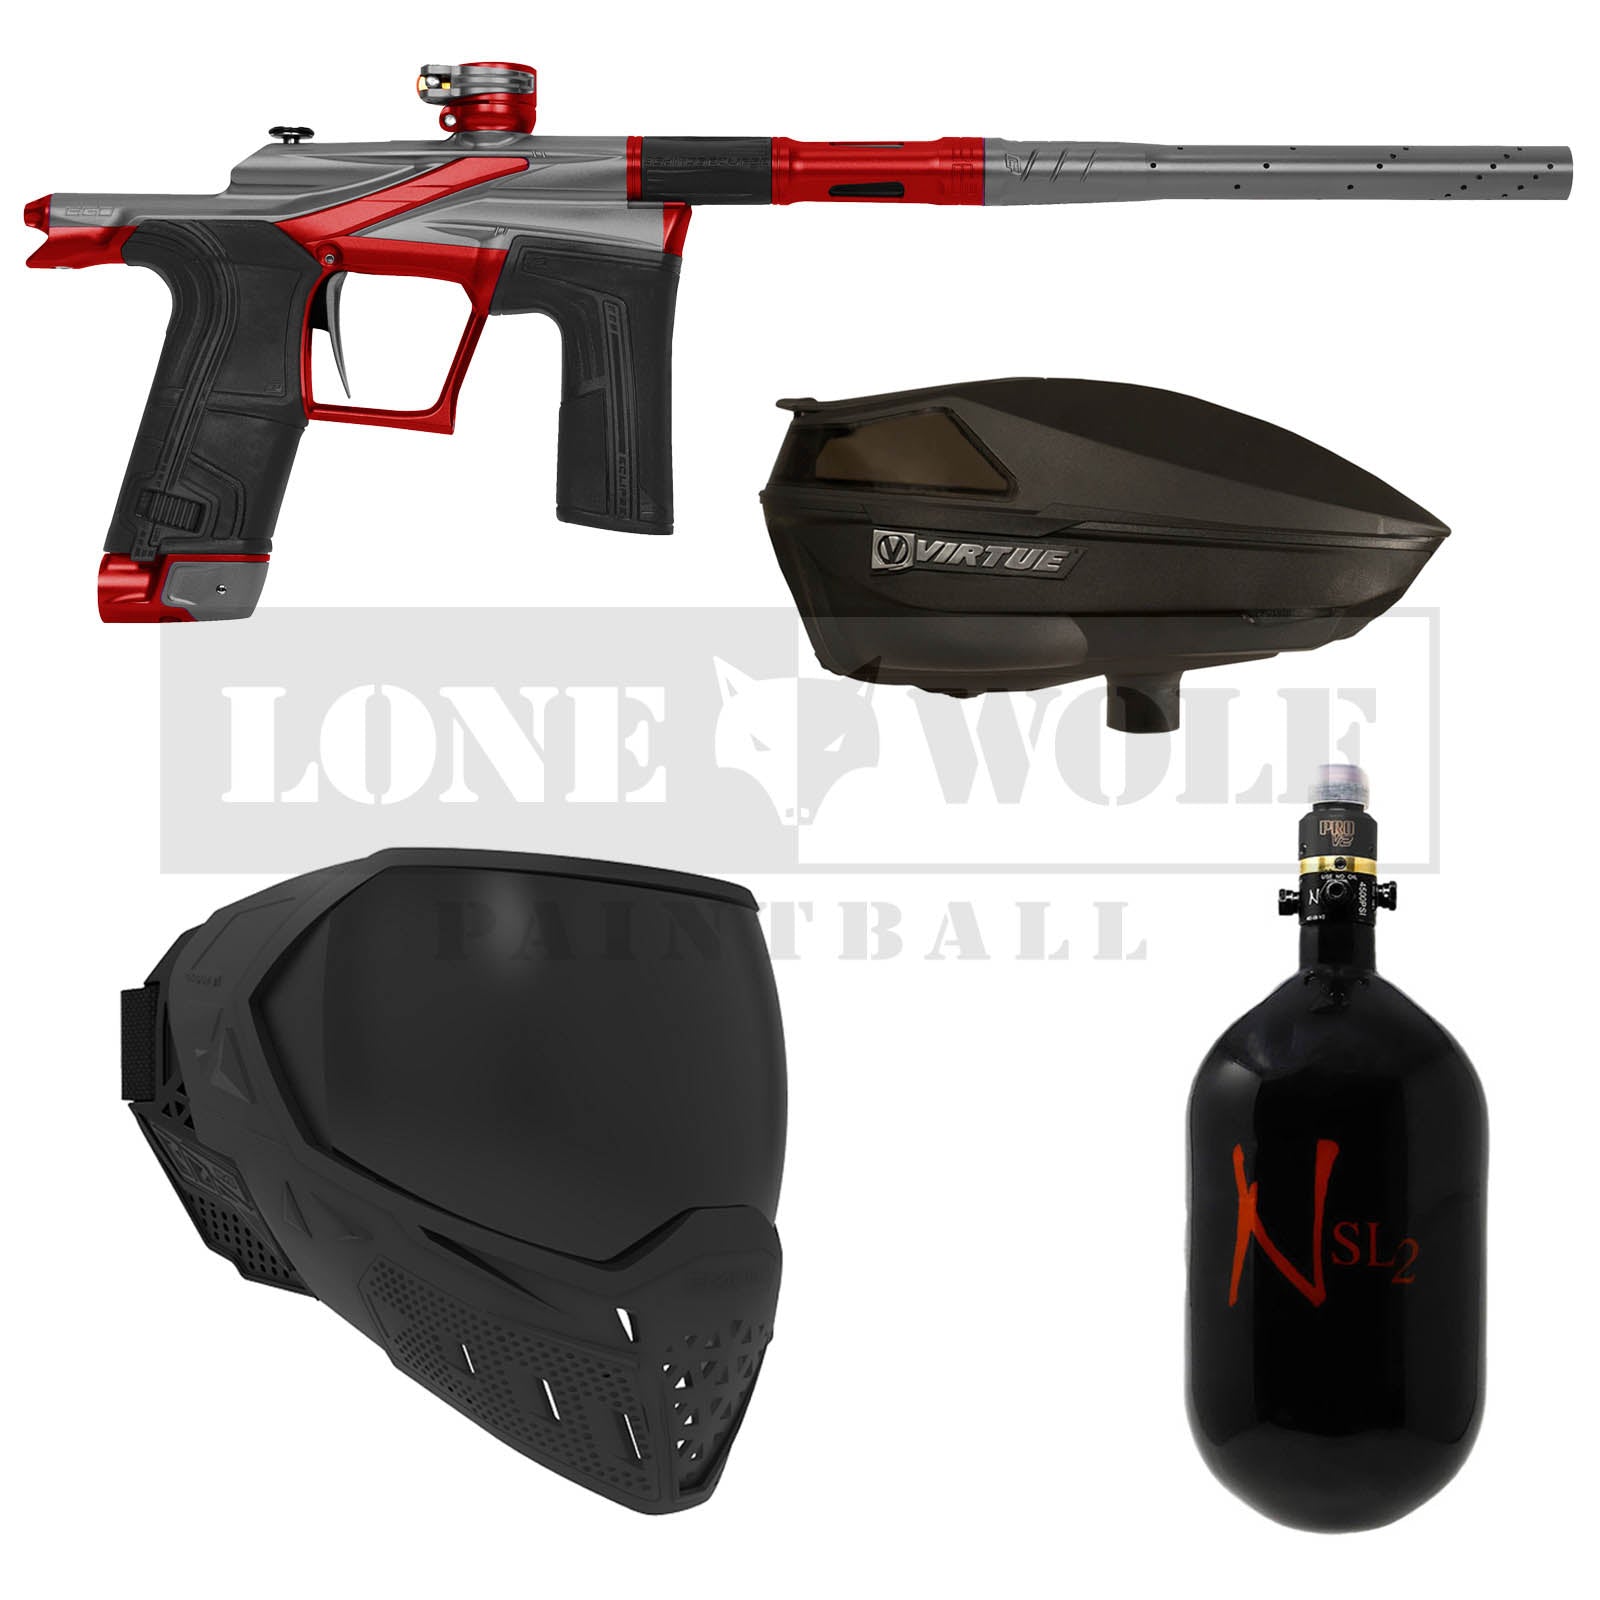 Used Planet Eclipse LV1.6 Paintball Gun - Black / Red w/ Red Grip